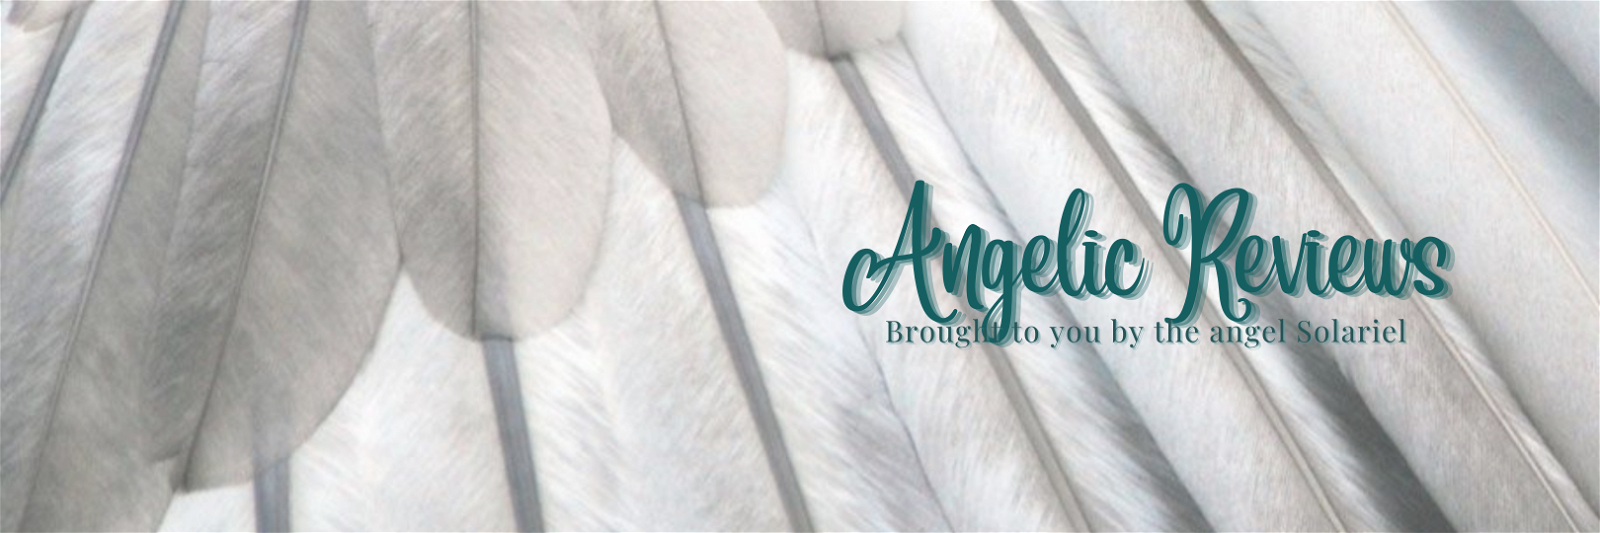 Angelic Reviews 008 - Online Shopping